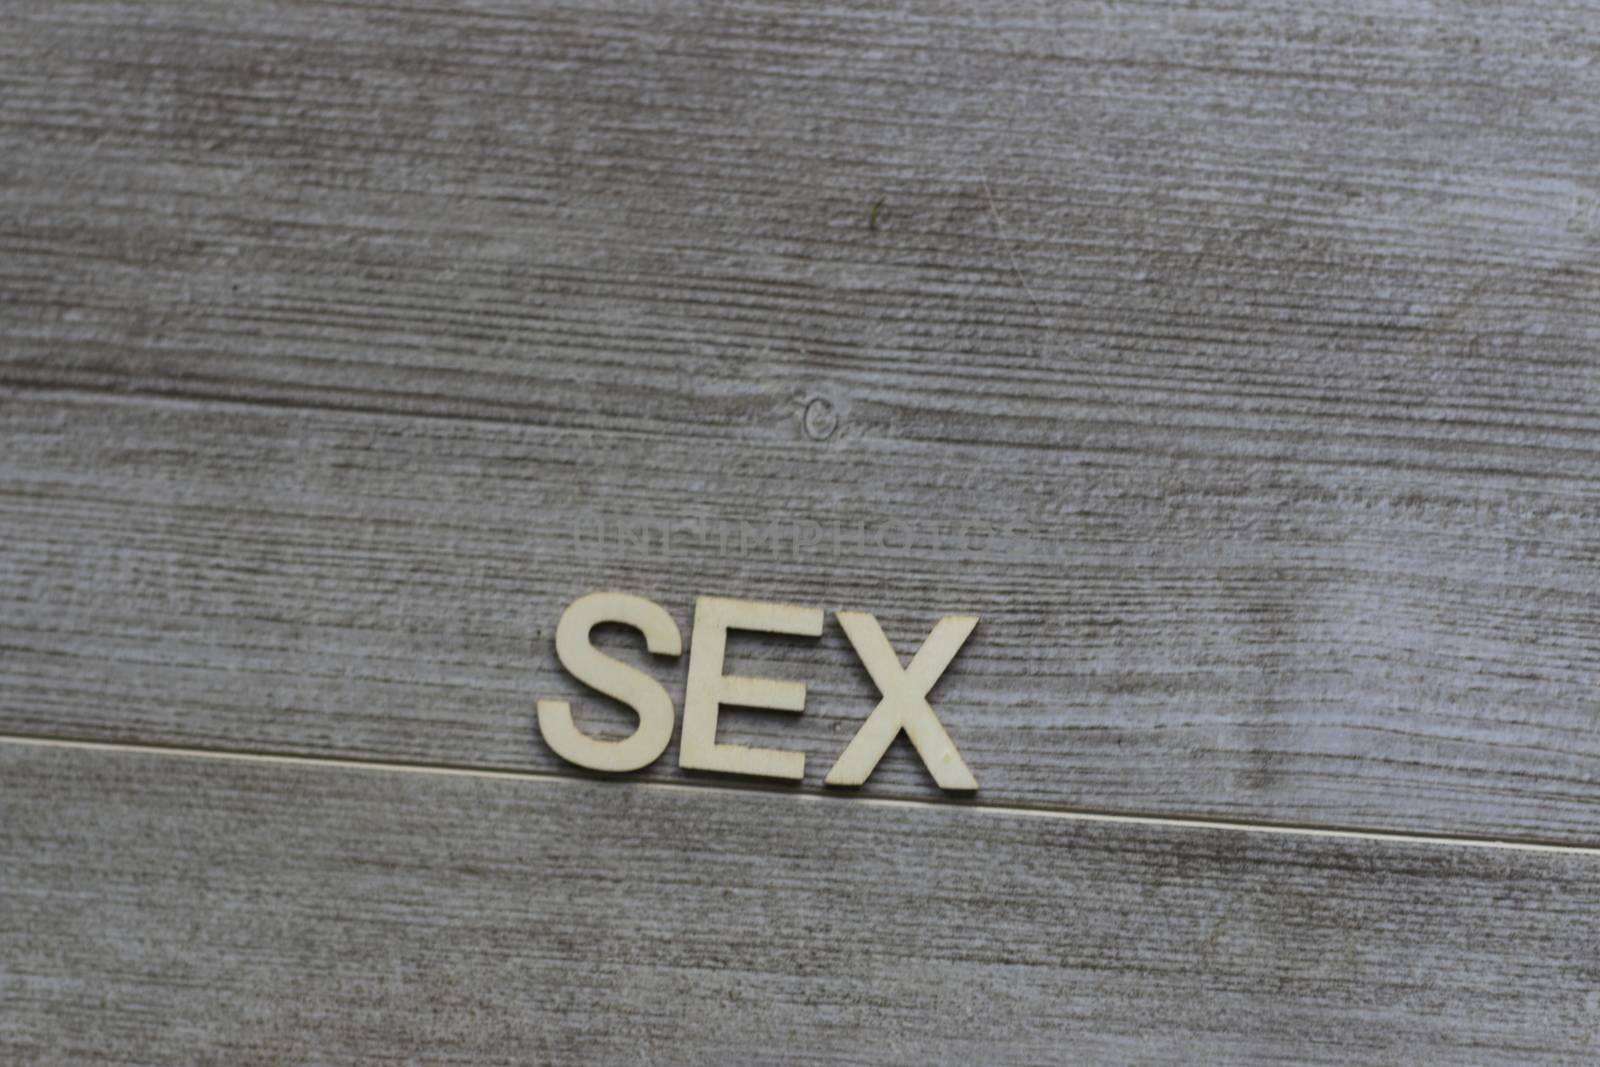 the word sex wrote out on a tile background by mynewturtle1